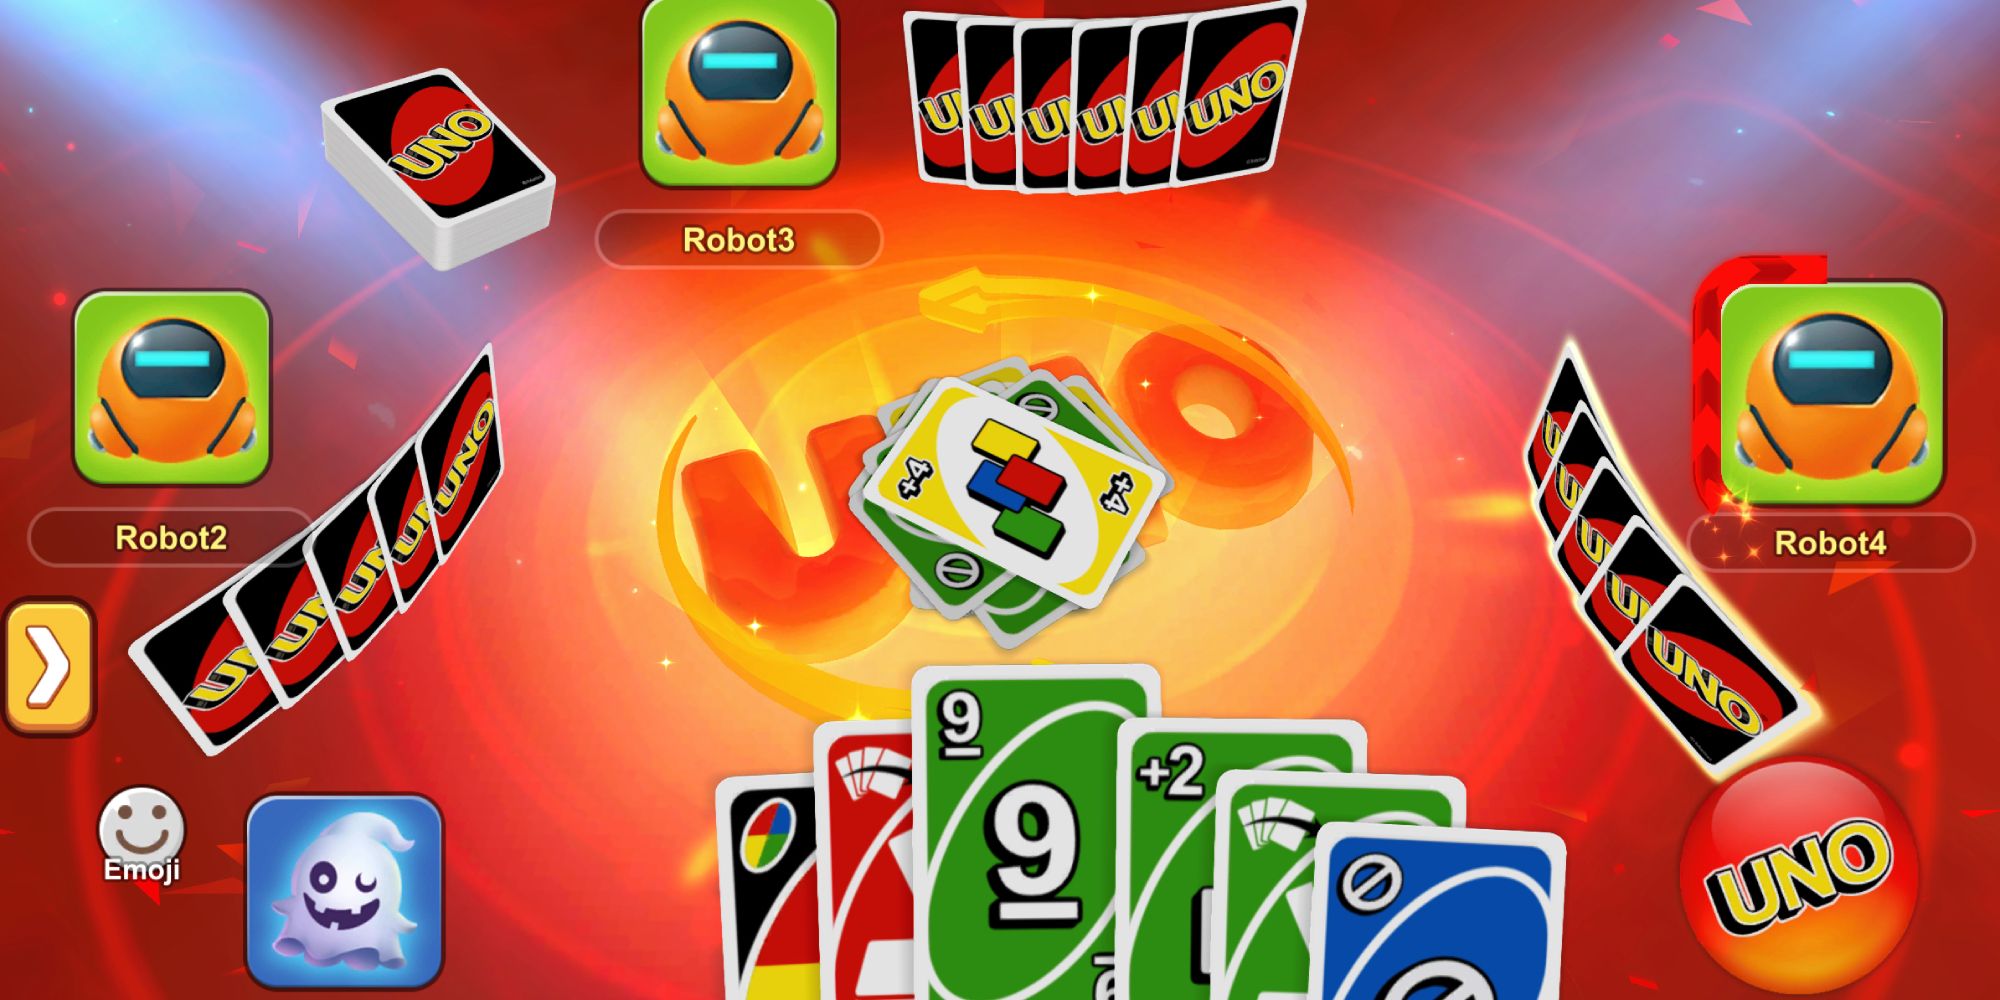 UNO 4 Player card game with Player 4's turn